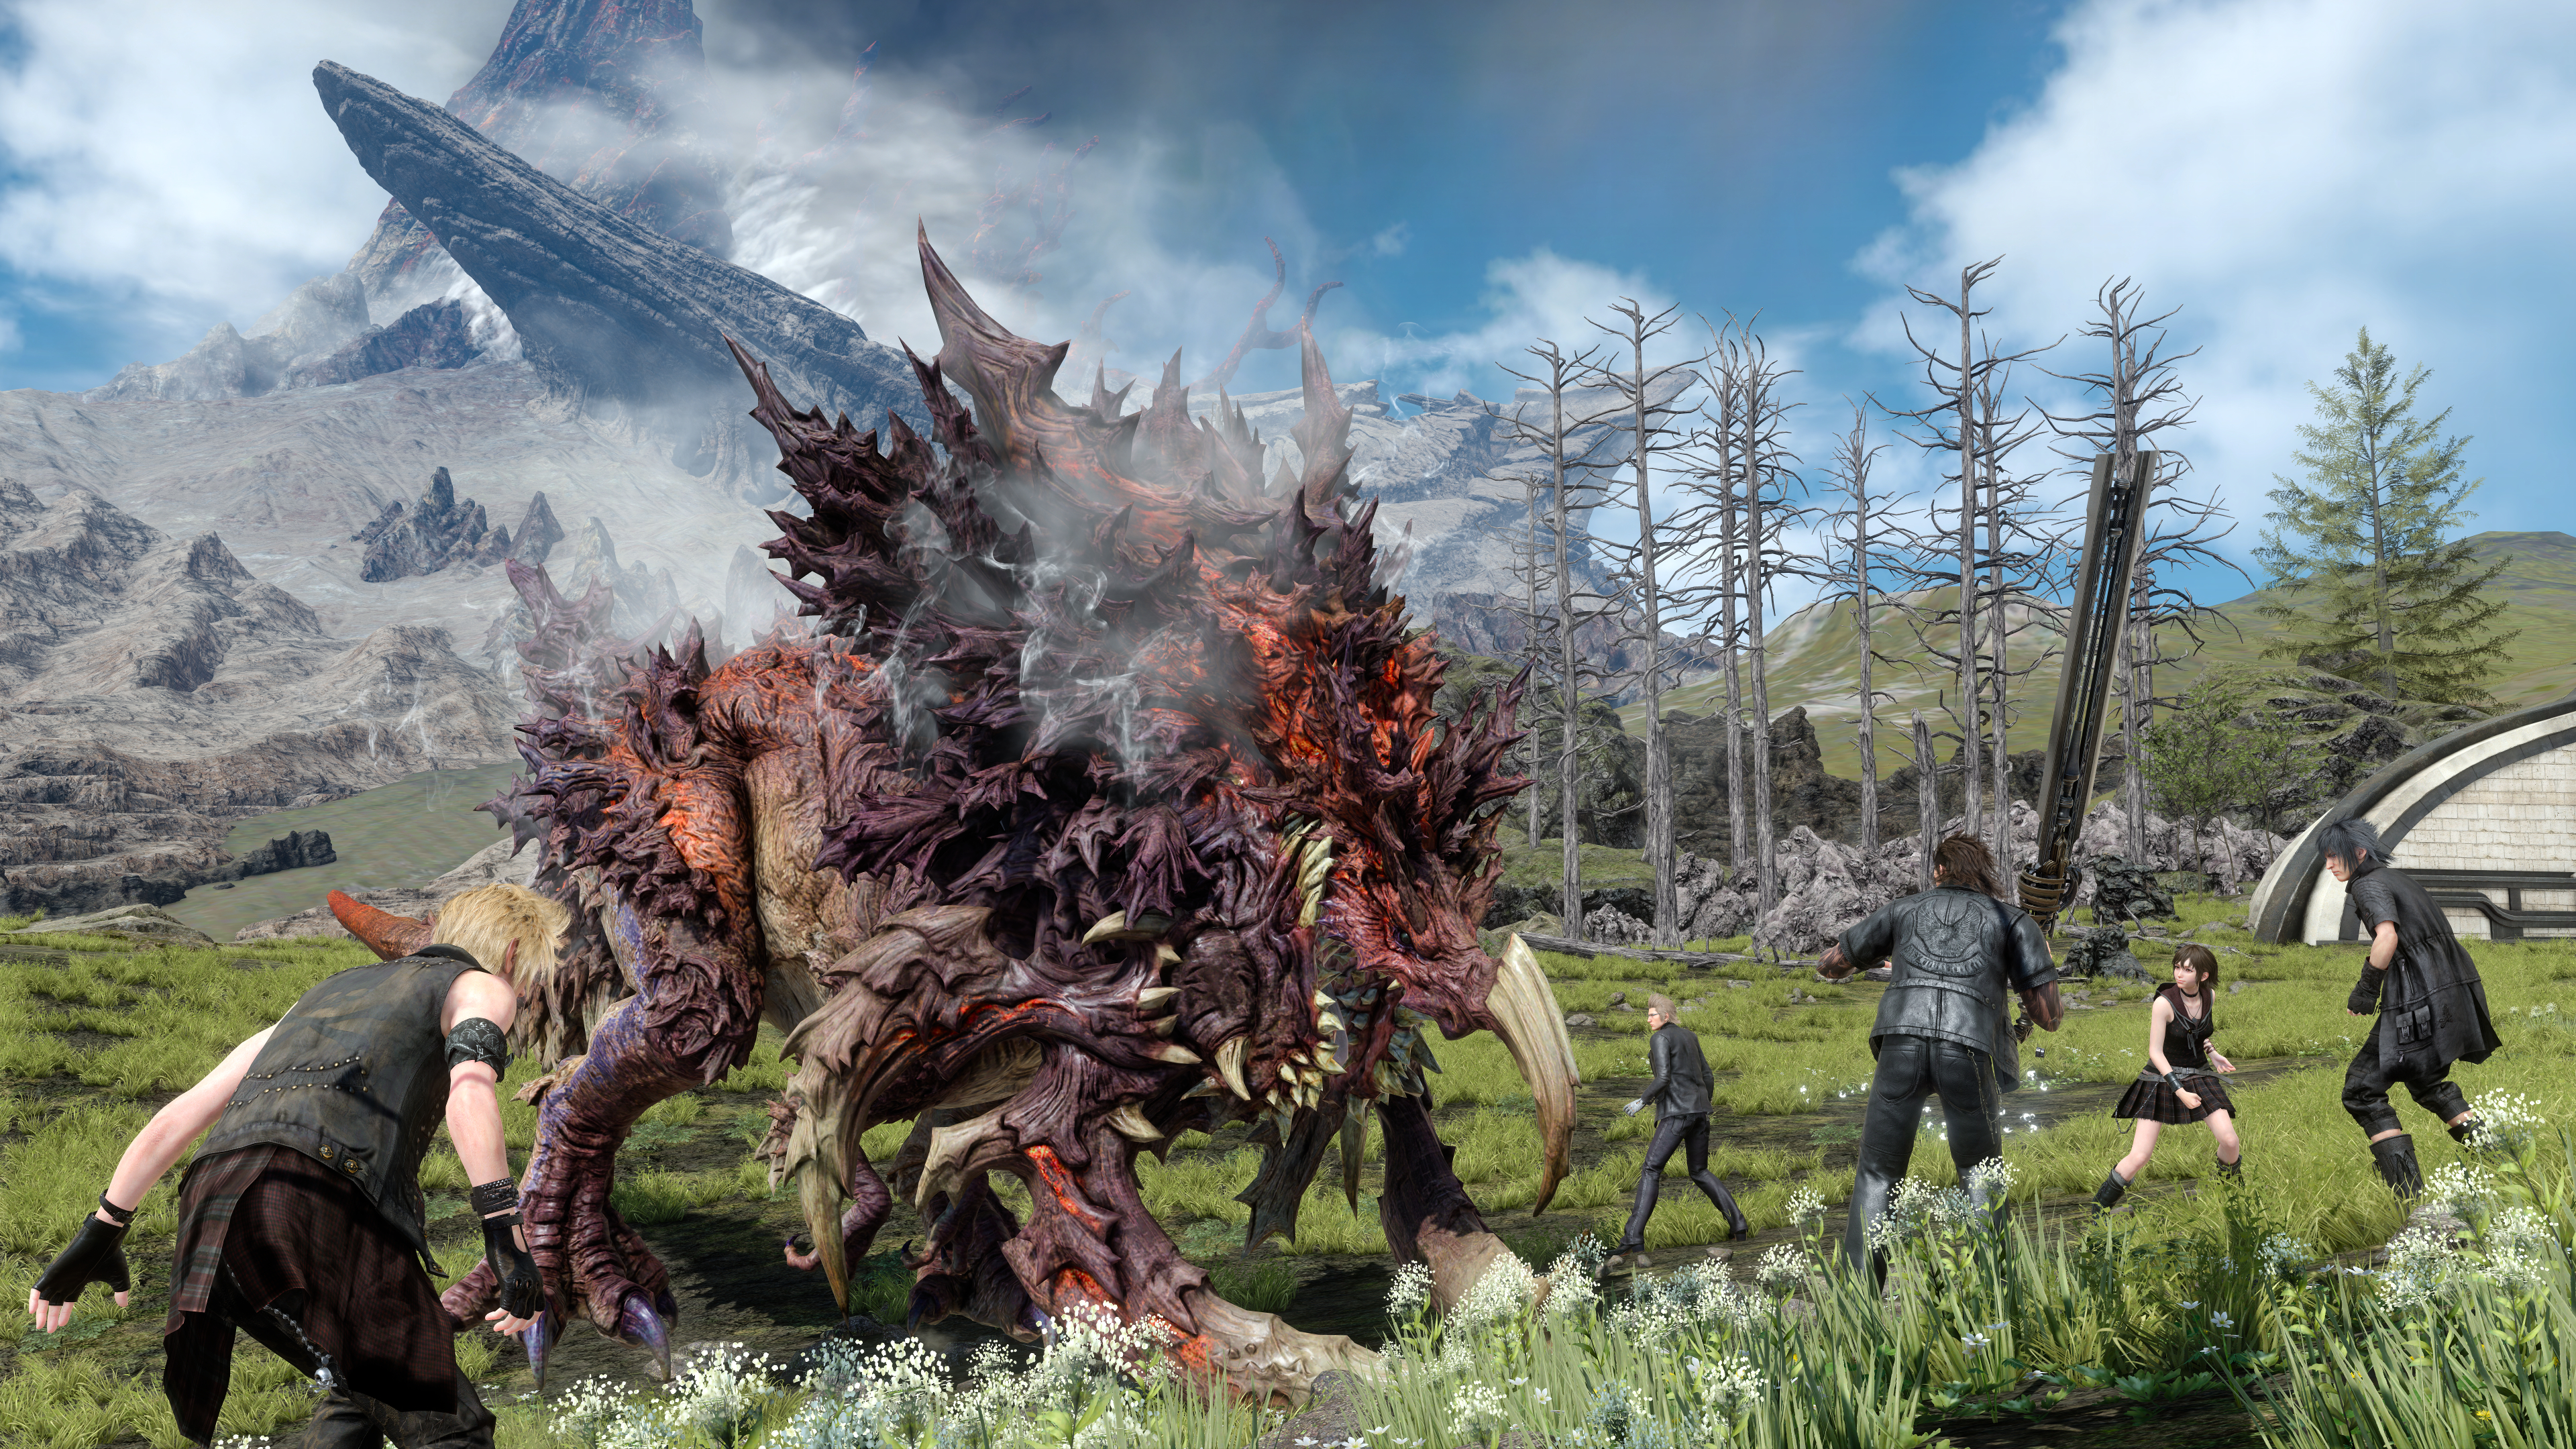 Final Fantasy 15: Windows Edition coming to PC in 2018